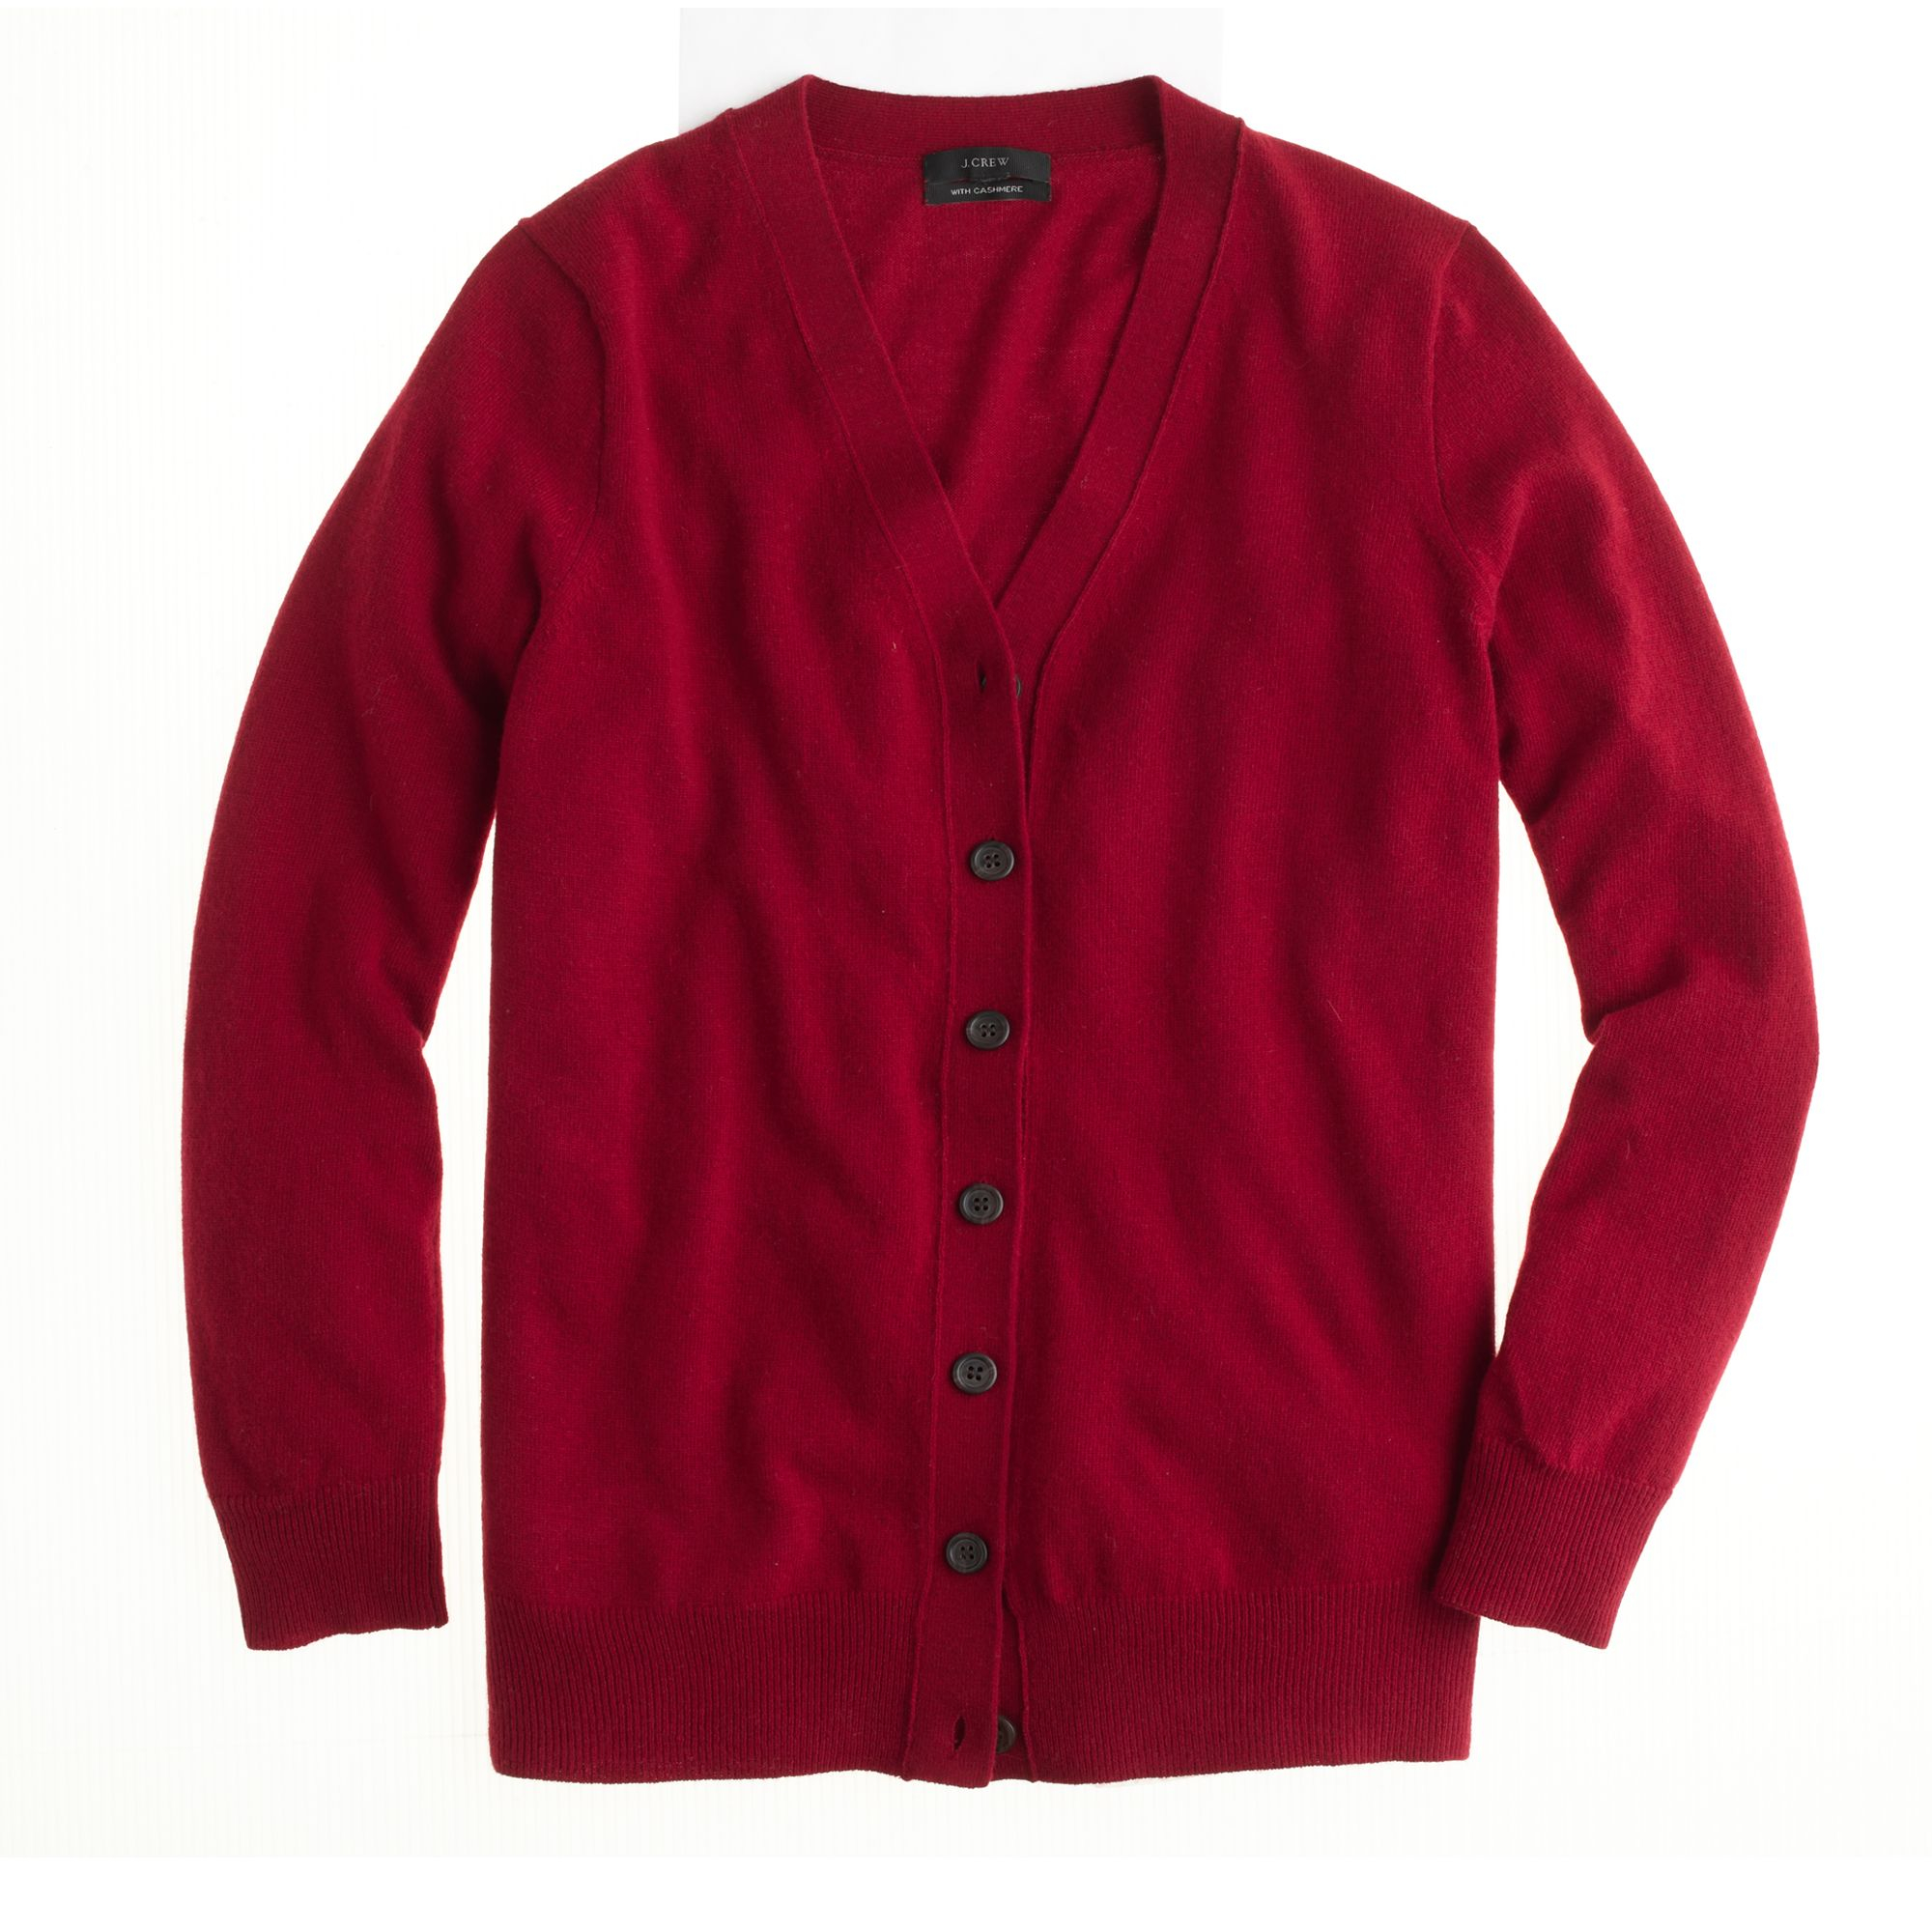 J.crew V-neck Cardigan in Red (antique red) | Lyst